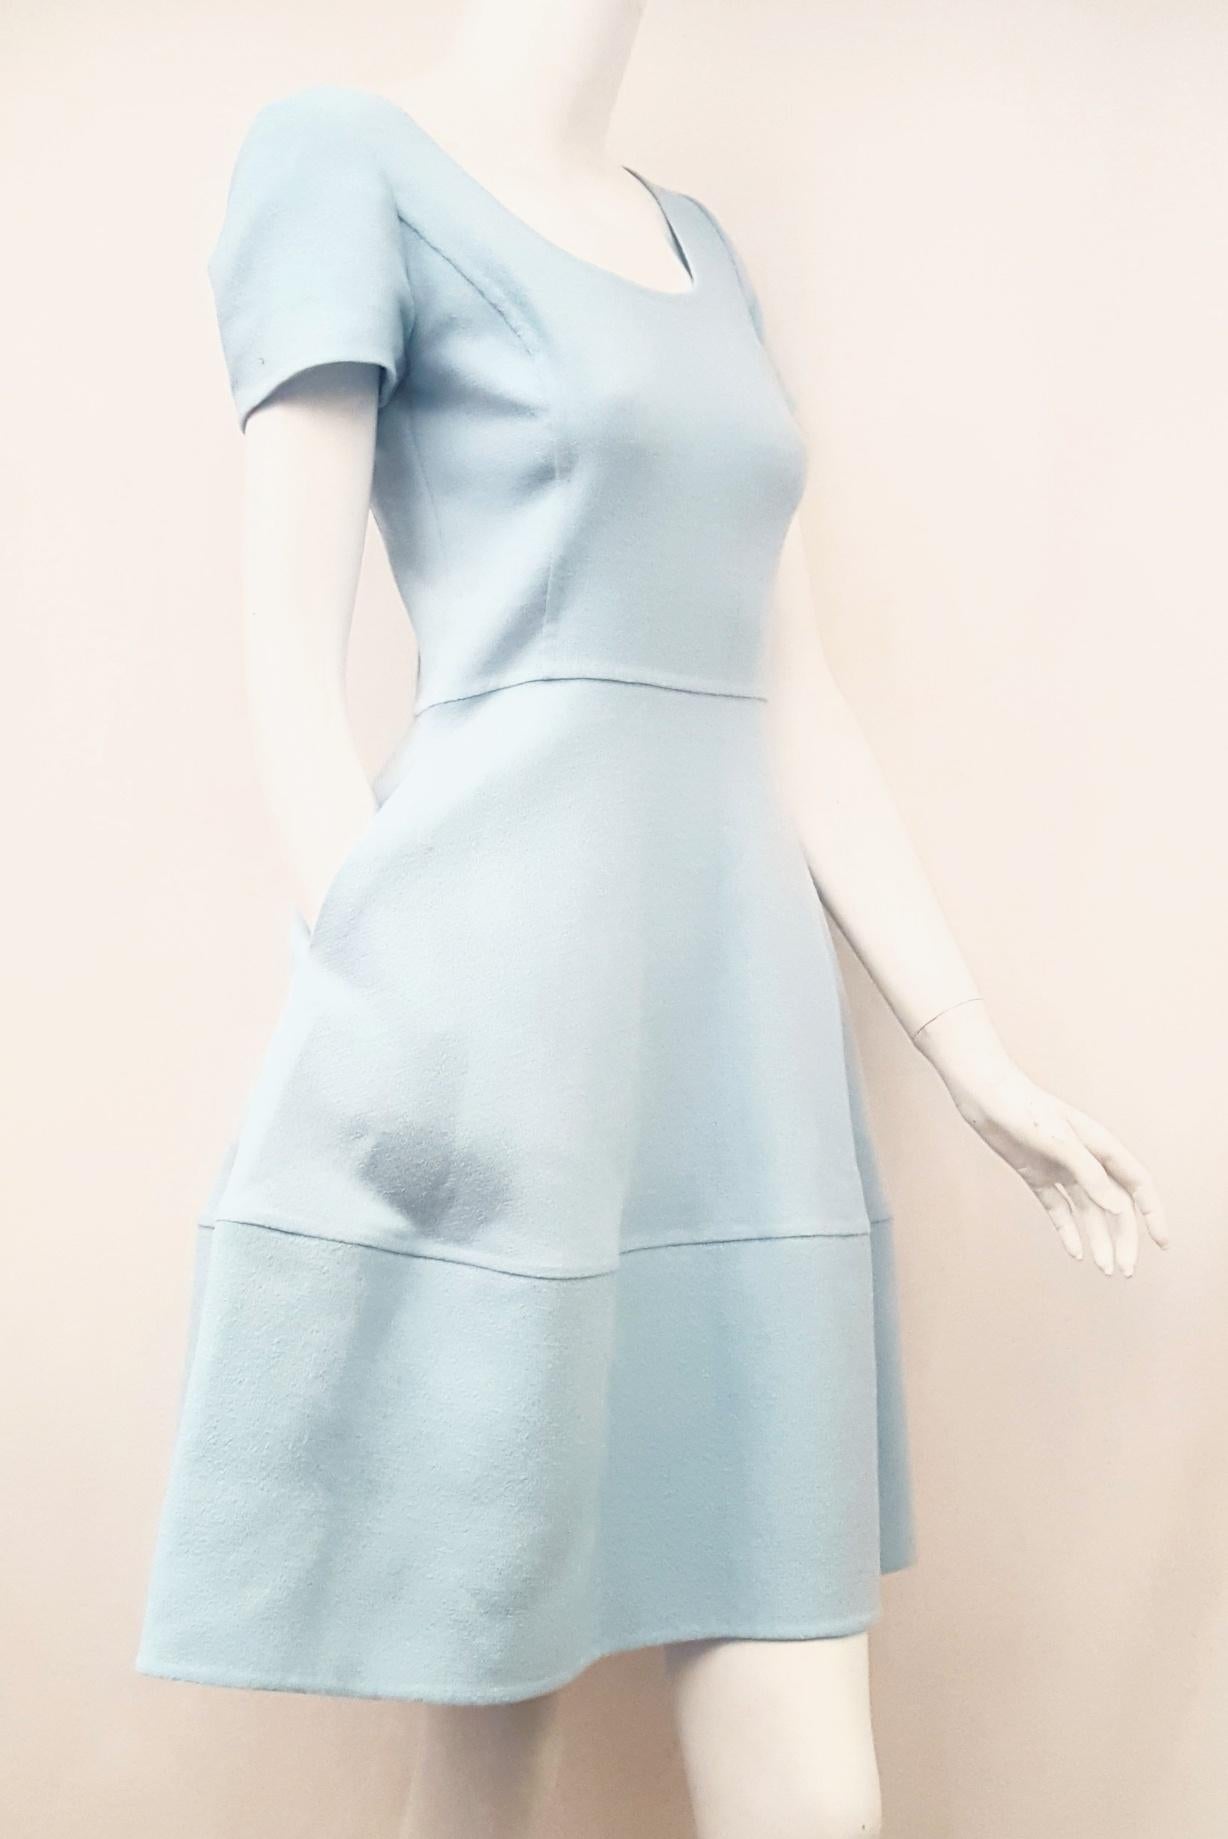 Oscar de la Renta short sleeve A-line dress with fitted waist is a casual yet elegant dress.  With scoop neckline and textured pattern throughout, this dress is the perfect travel companion.  Two side slit pockets for completes the flirty look of